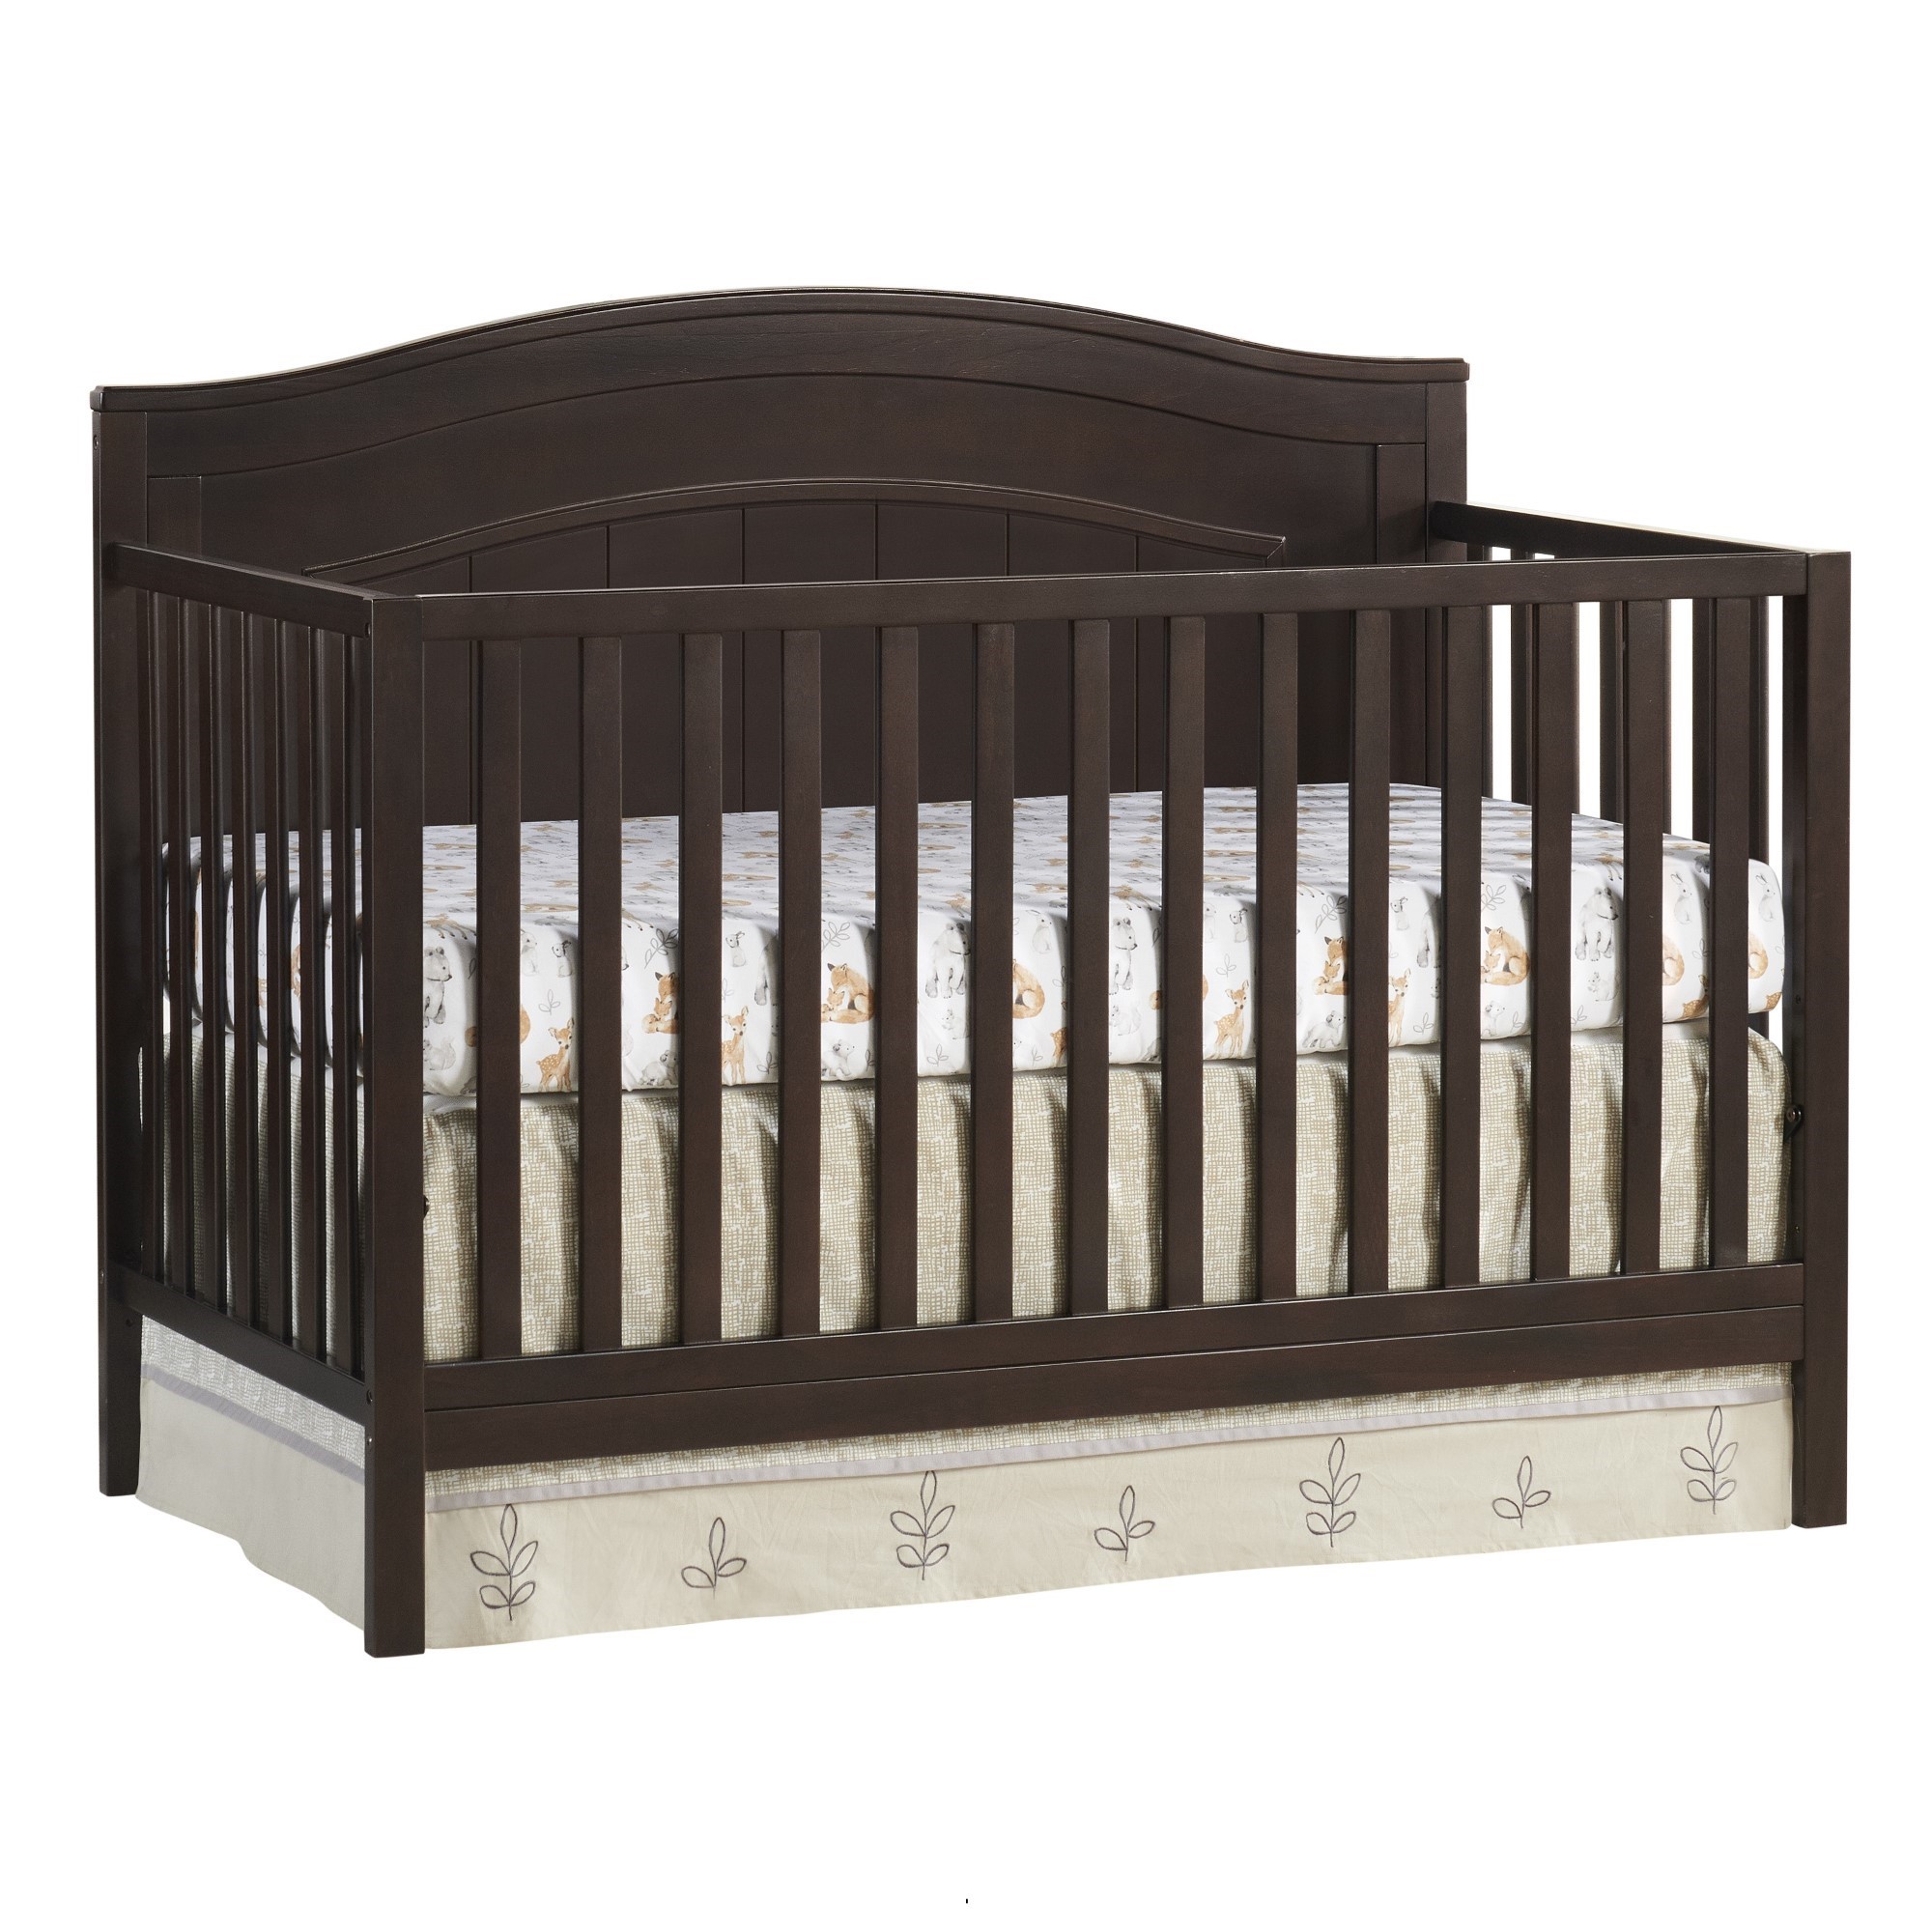 Oxford Baby North Bay 4-in-1 Convertible Crib, Espresso Brown, GREENGUARD Gold Certified - image 4 of 13